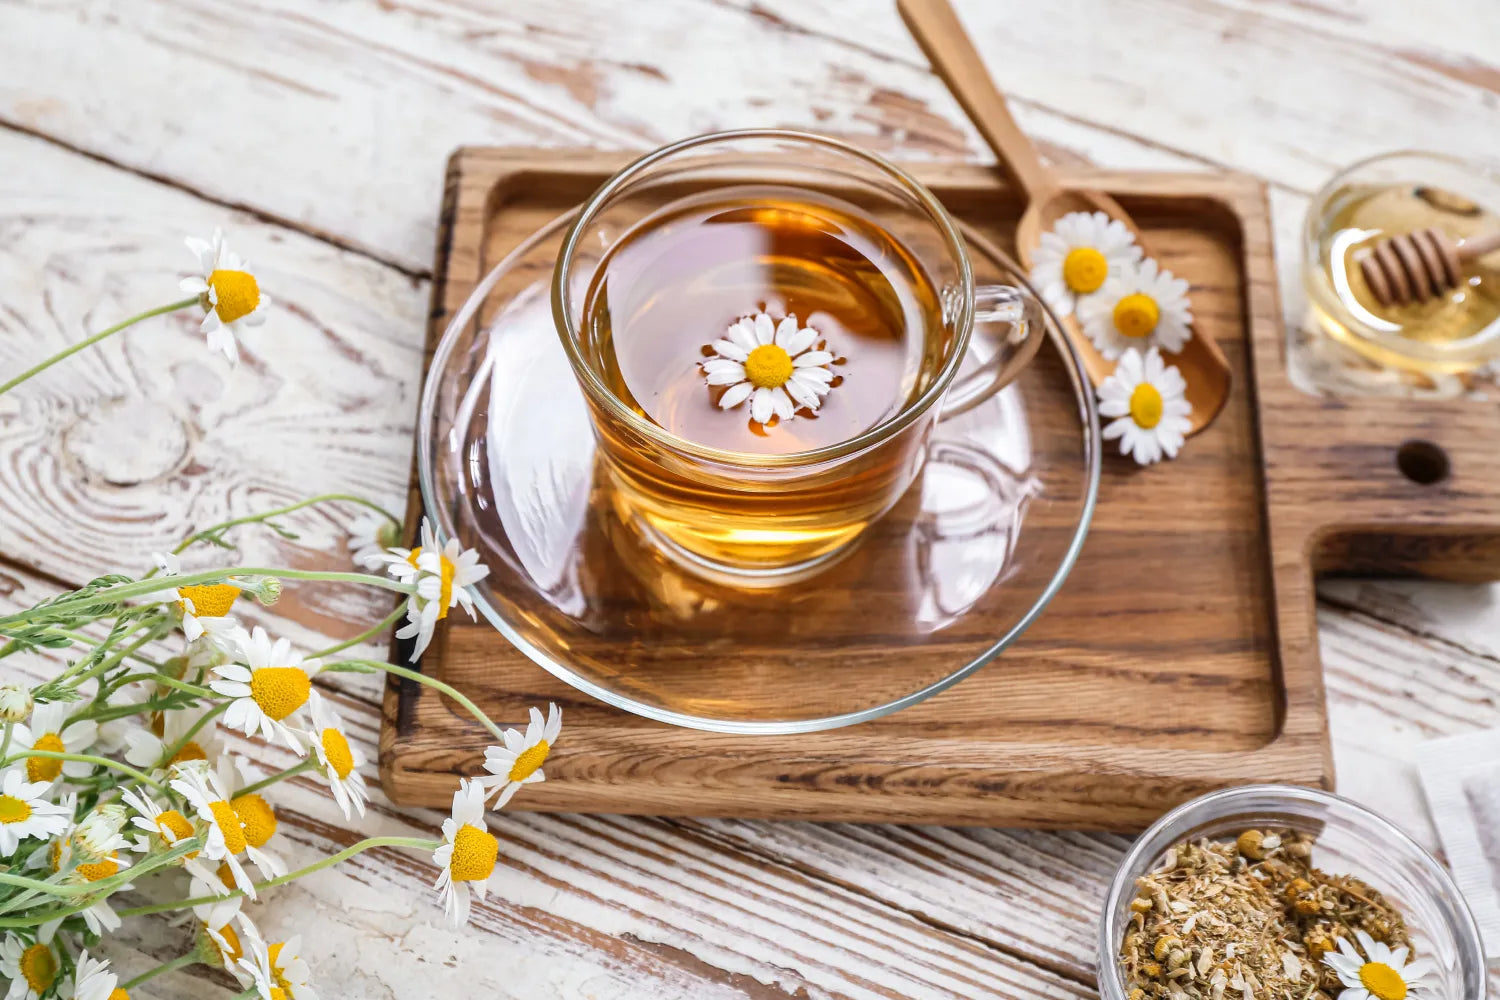 10 Teas That May Help Support Healthy Blood Pressure